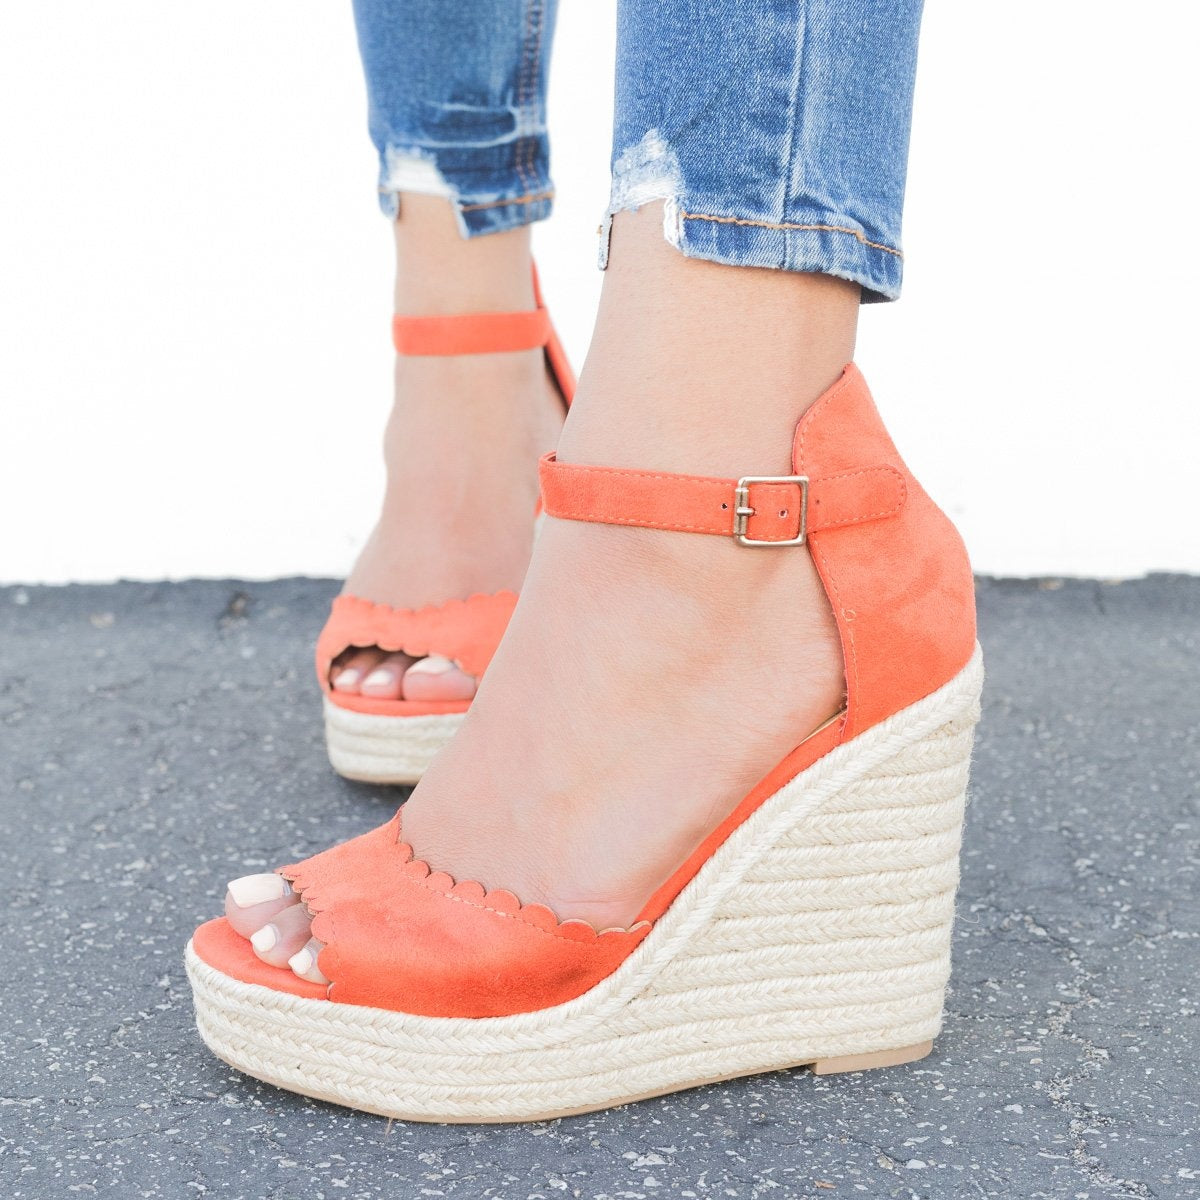 scalloped wedges